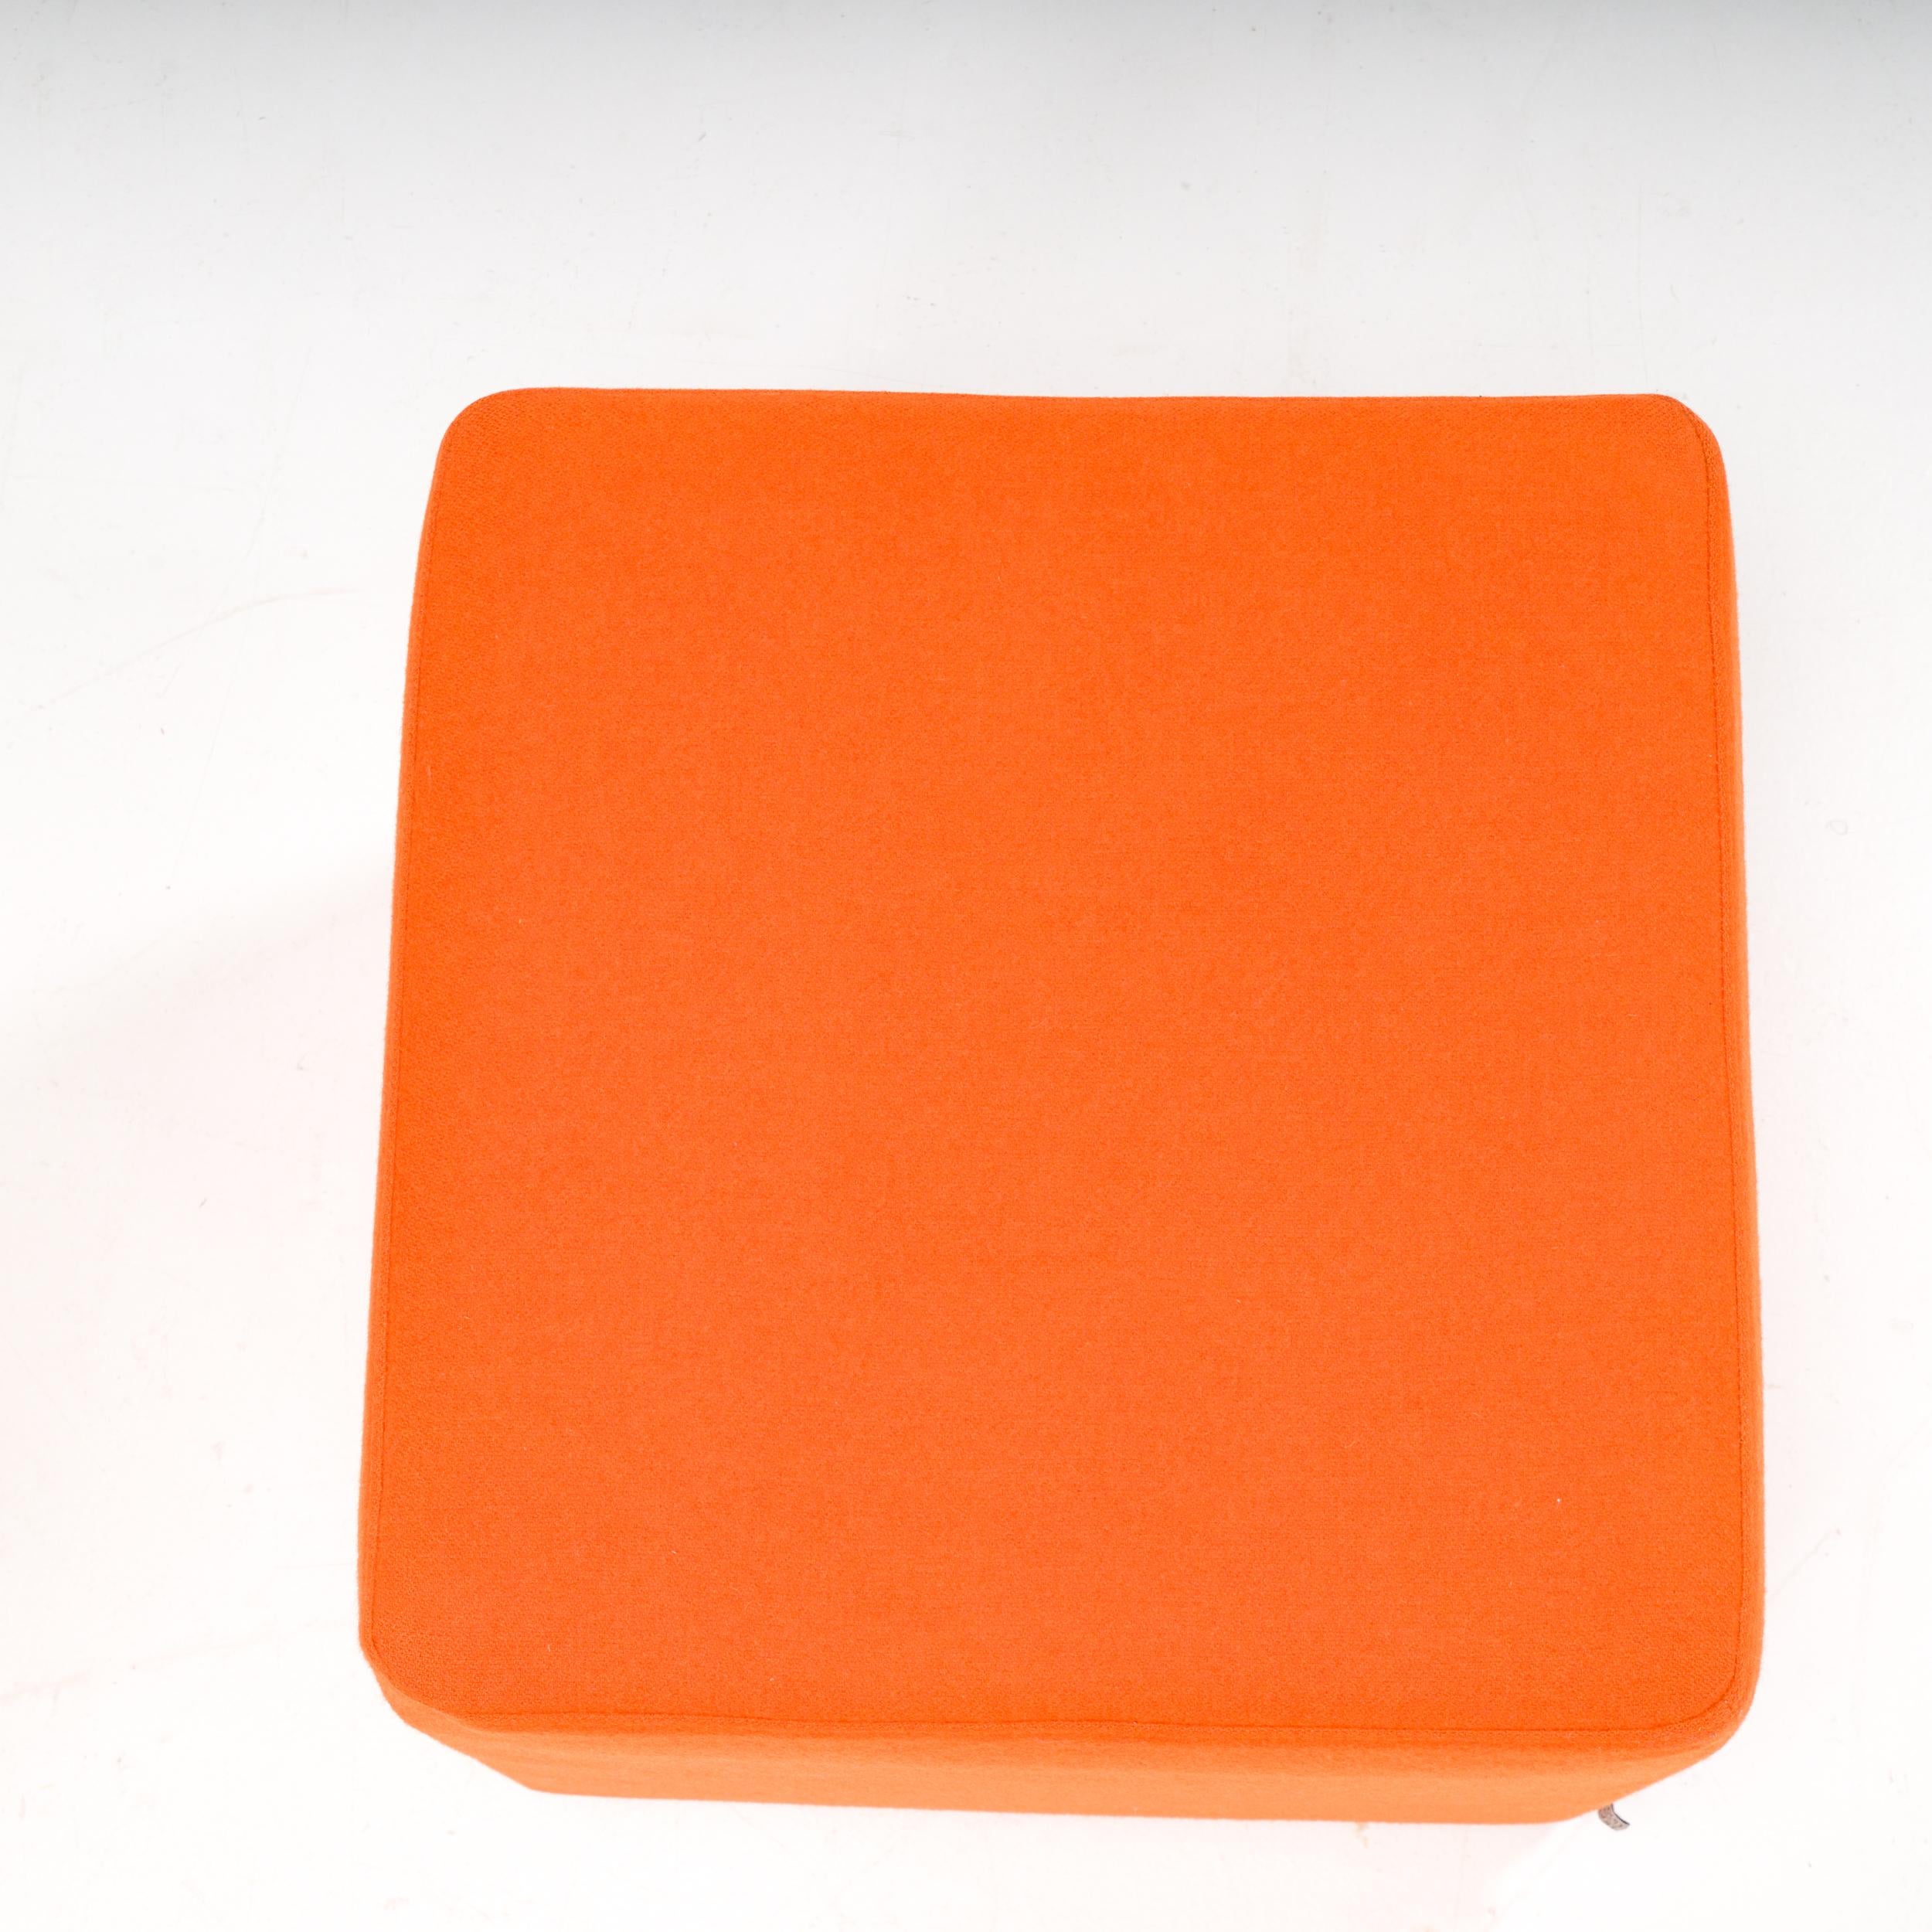 SITS Furniture Square Orange Fabric Small Stools, Set of 10 For Sale 3